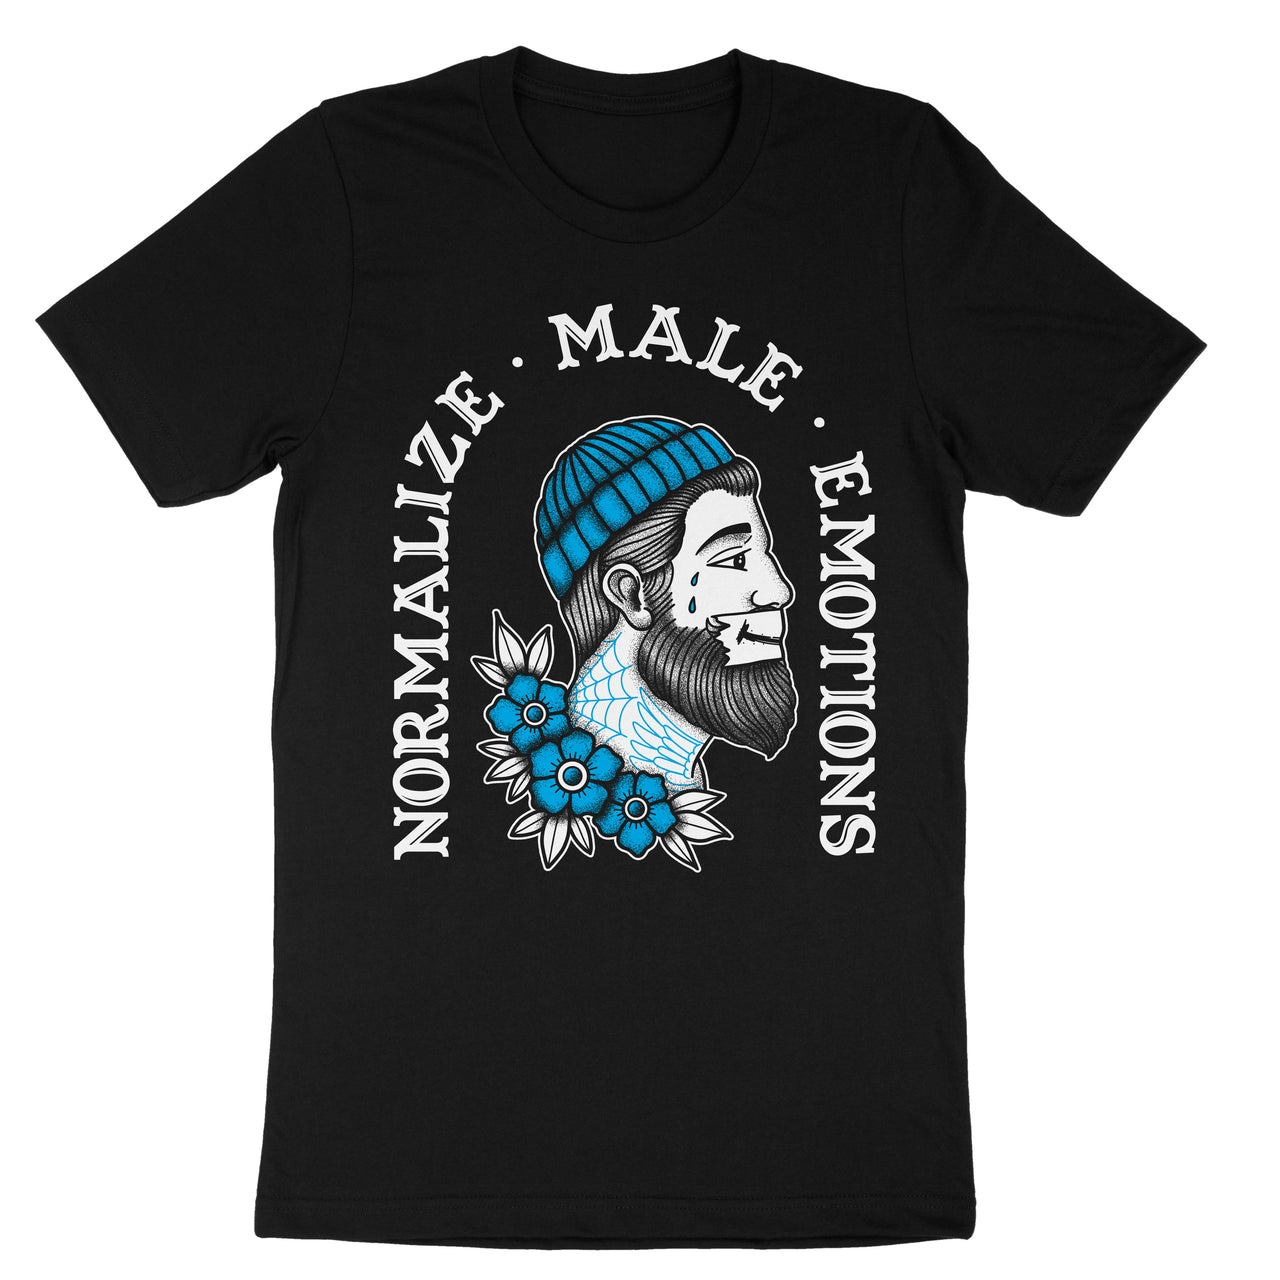 Normalize Male Emotions Tee